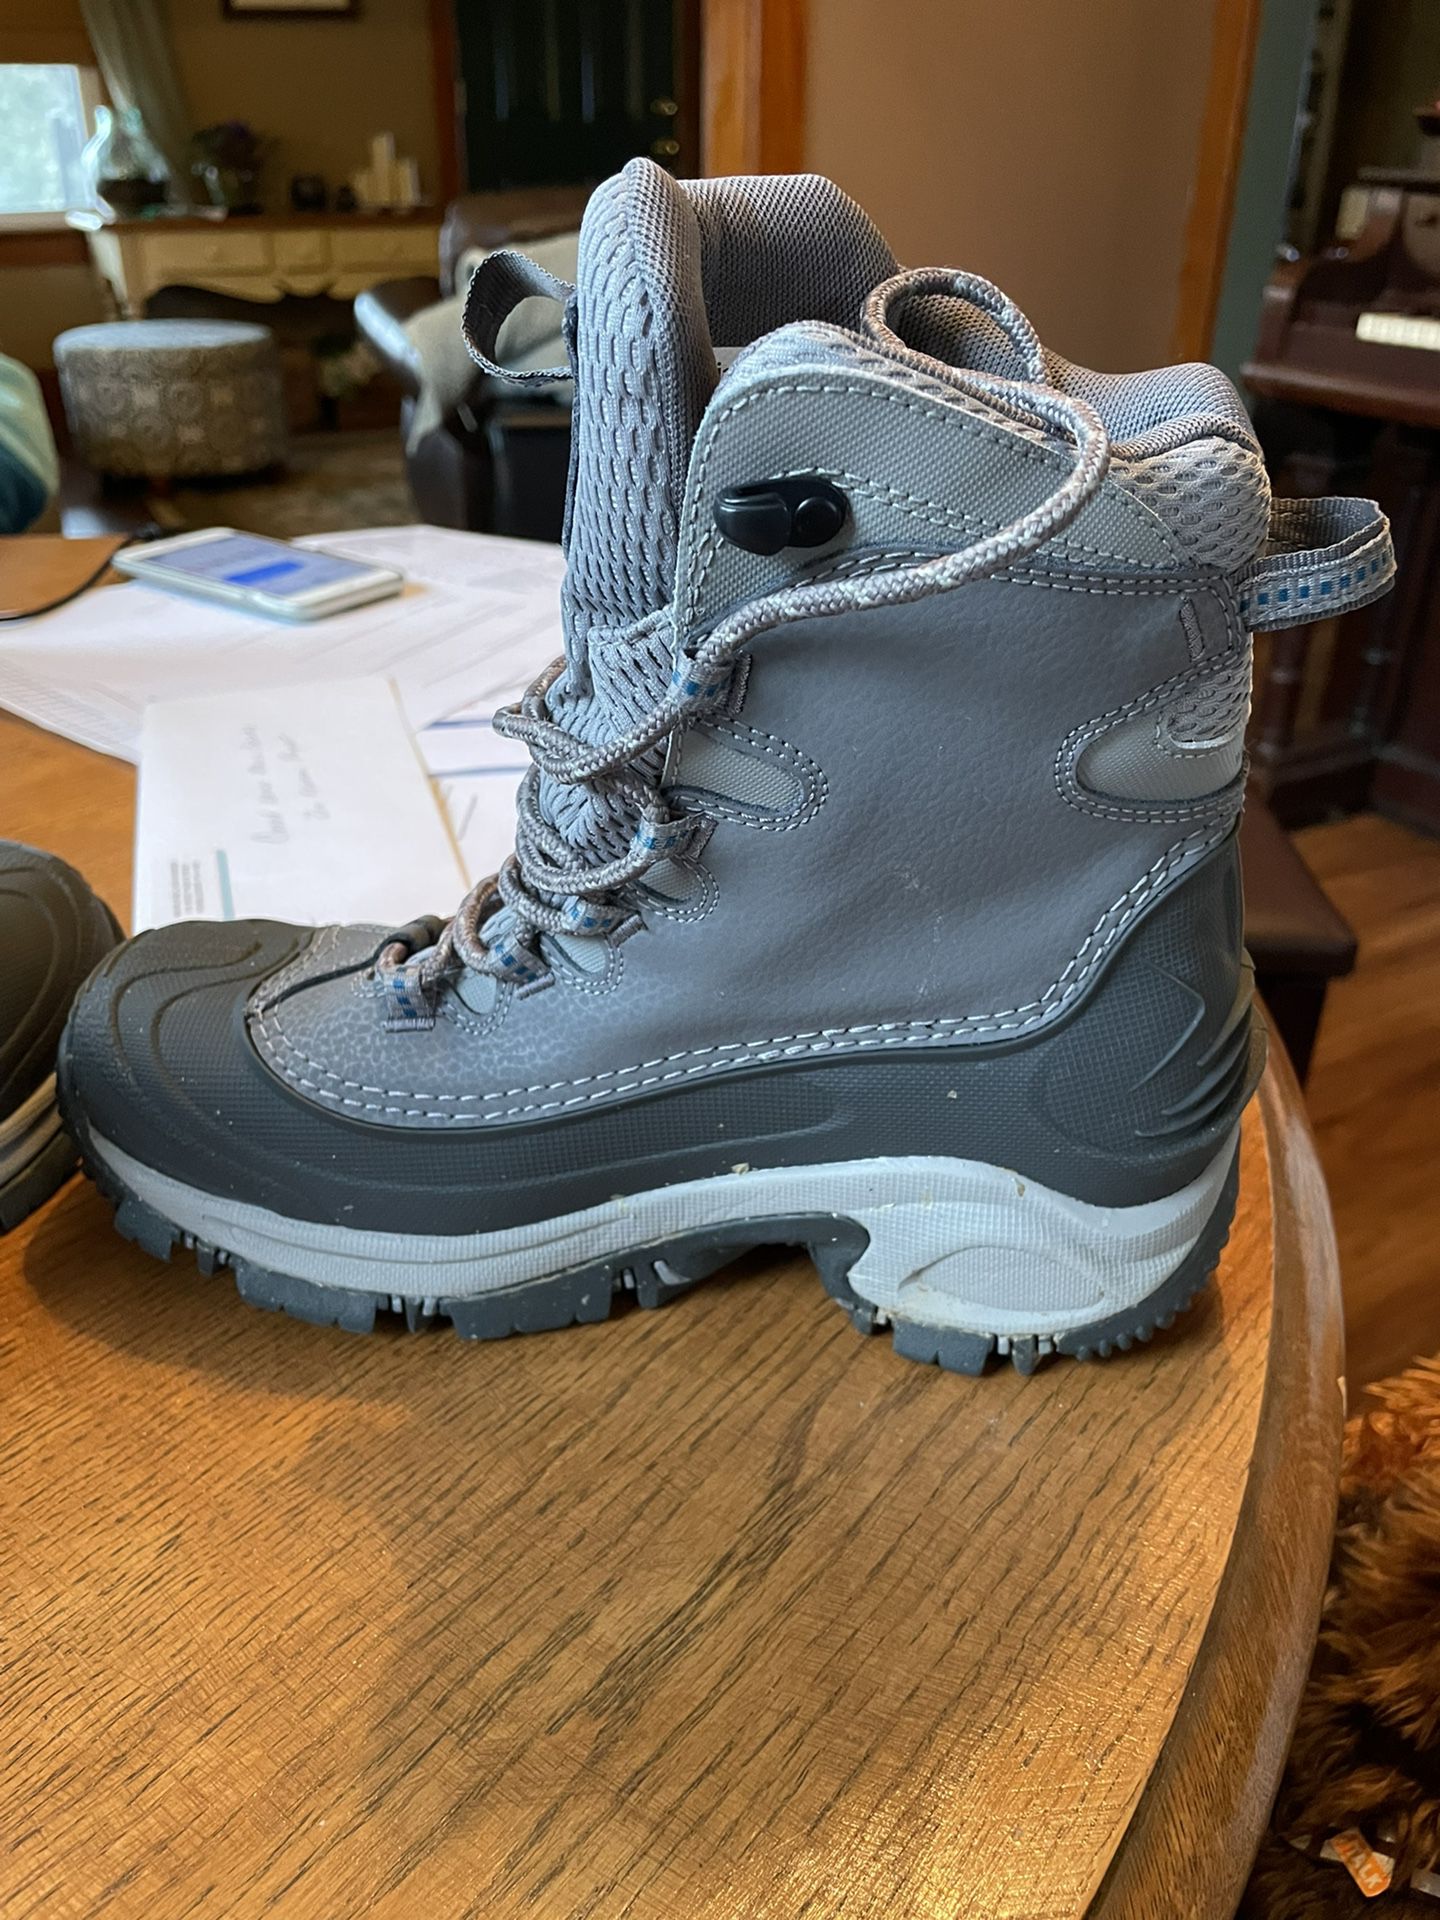 Columbia Bugaboot Waterproof Snow Boots Woman’s Size 6